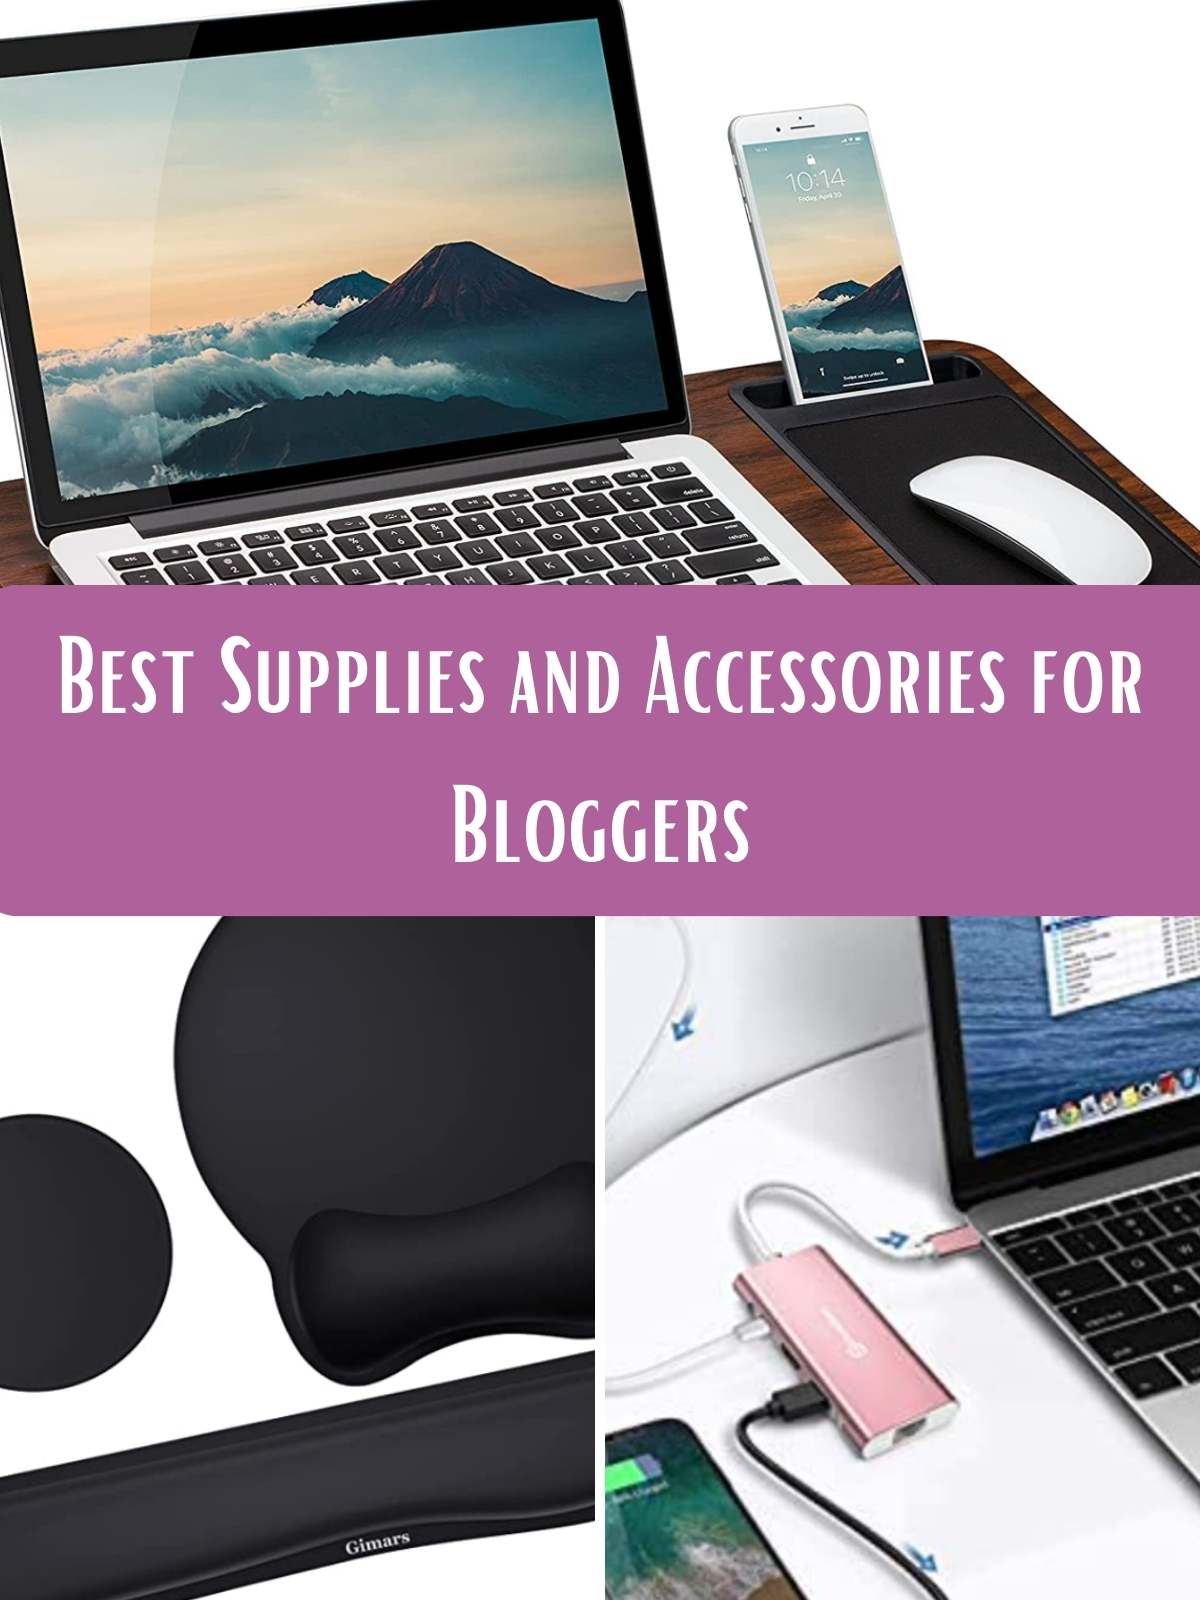 Best supplies and accessories for bloggers. 3 different examples.